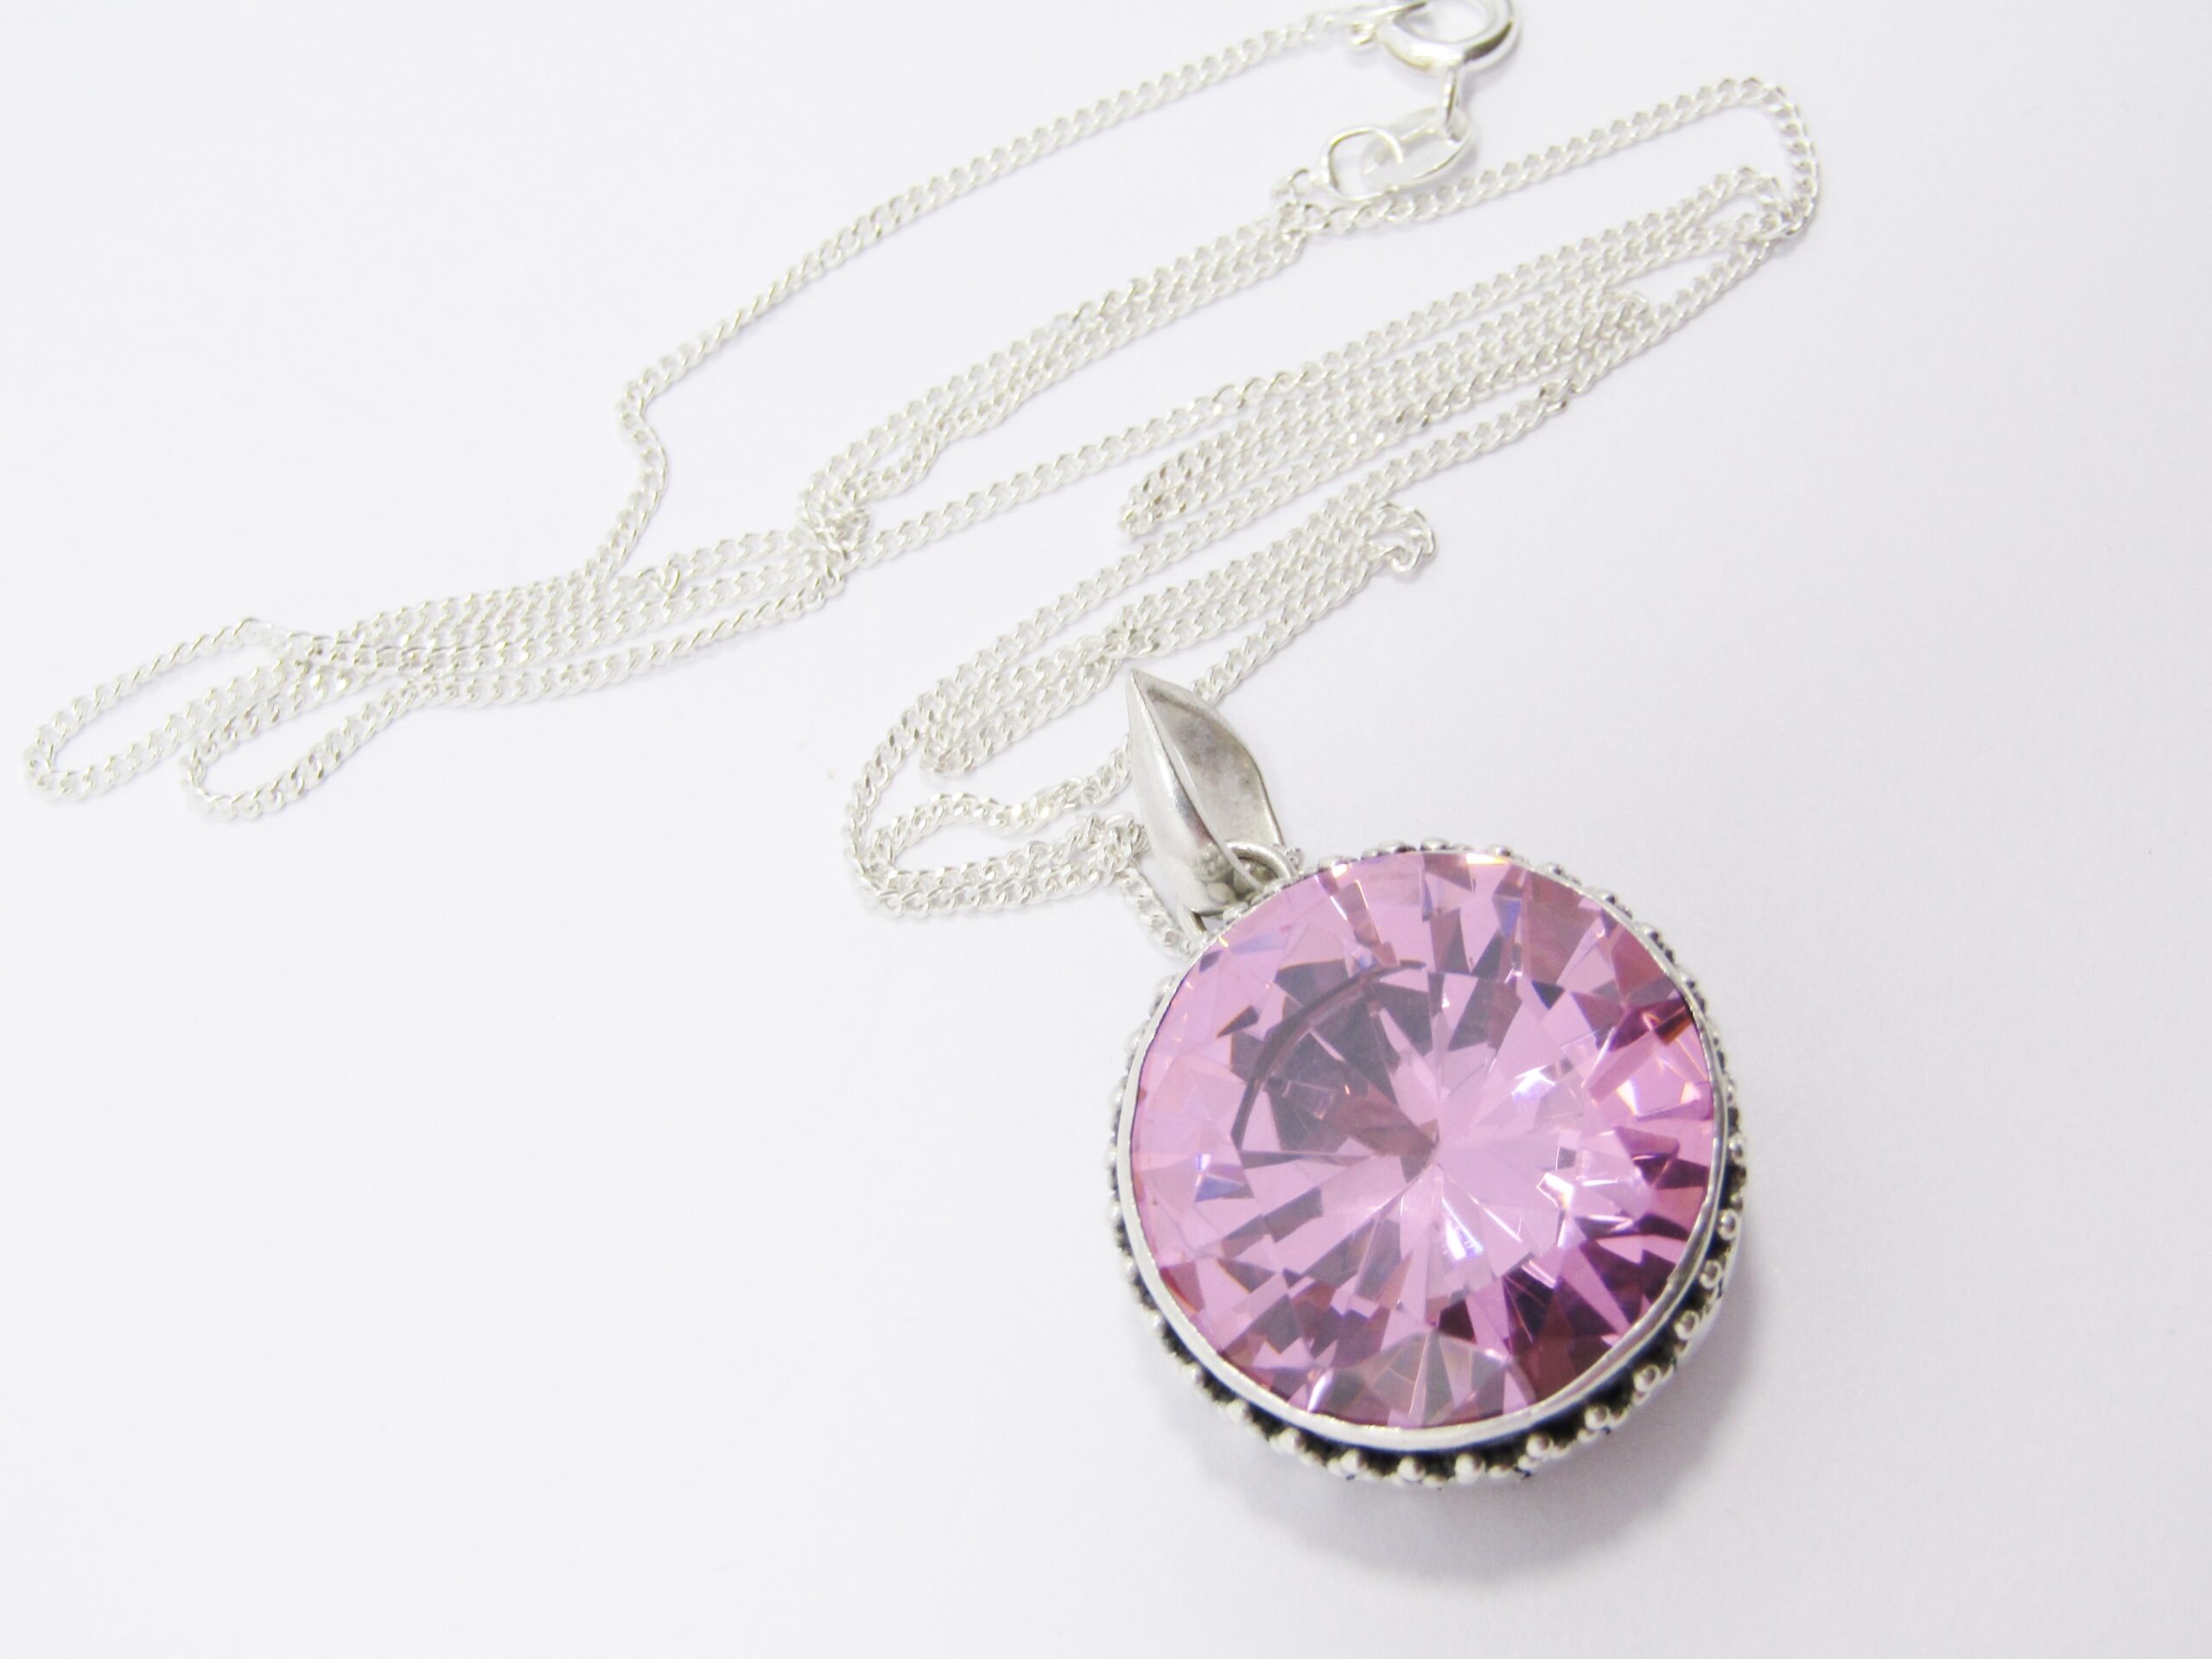 A Lovely Large Pink Zirconia Pendant on Chain in Sterling Silver